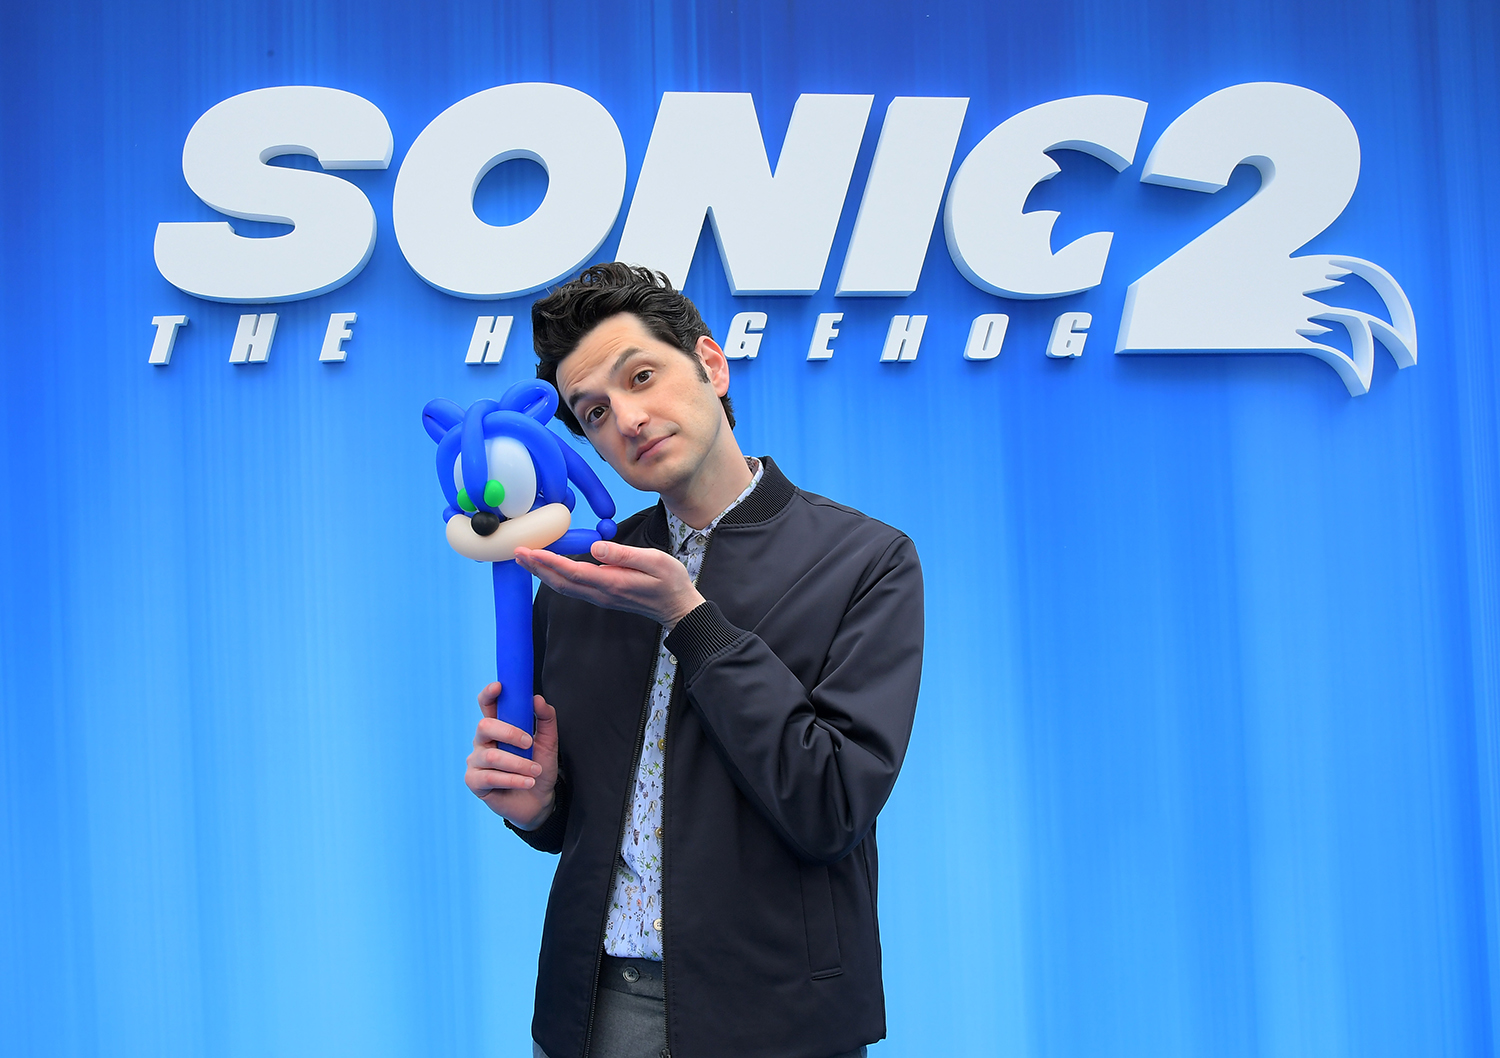 Parks and Recreation star Ben Schwartz at the Sonic the Hedgehog 2 premiere.